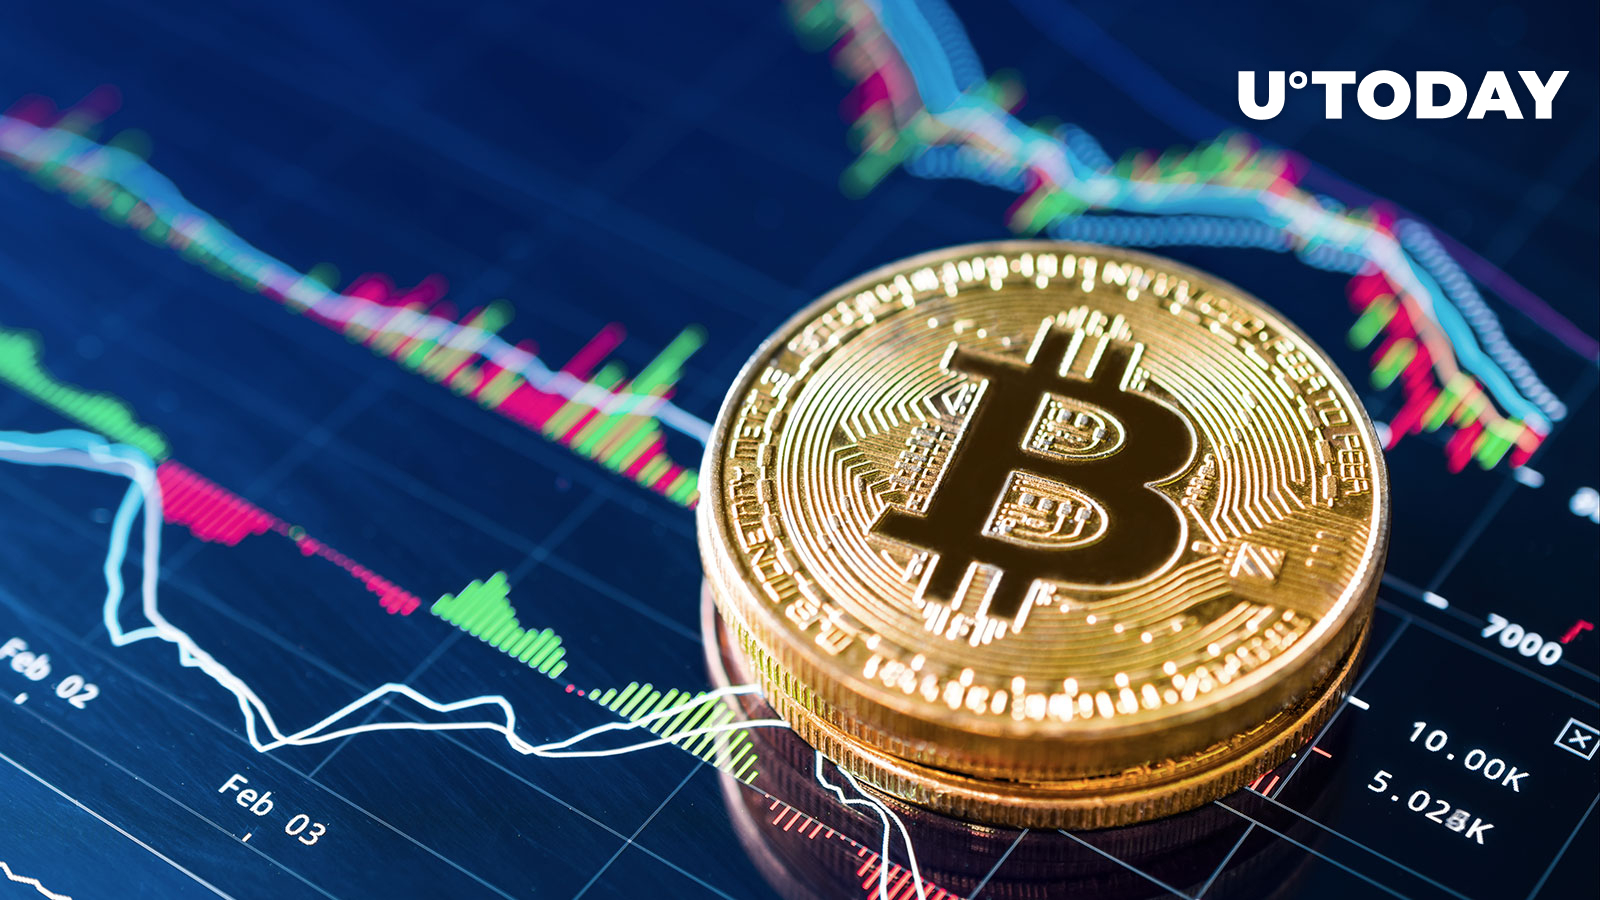 Bitcoin (BTC) Price Eyes ,000 as Top Analyst Warns Investors Ahead of Halving